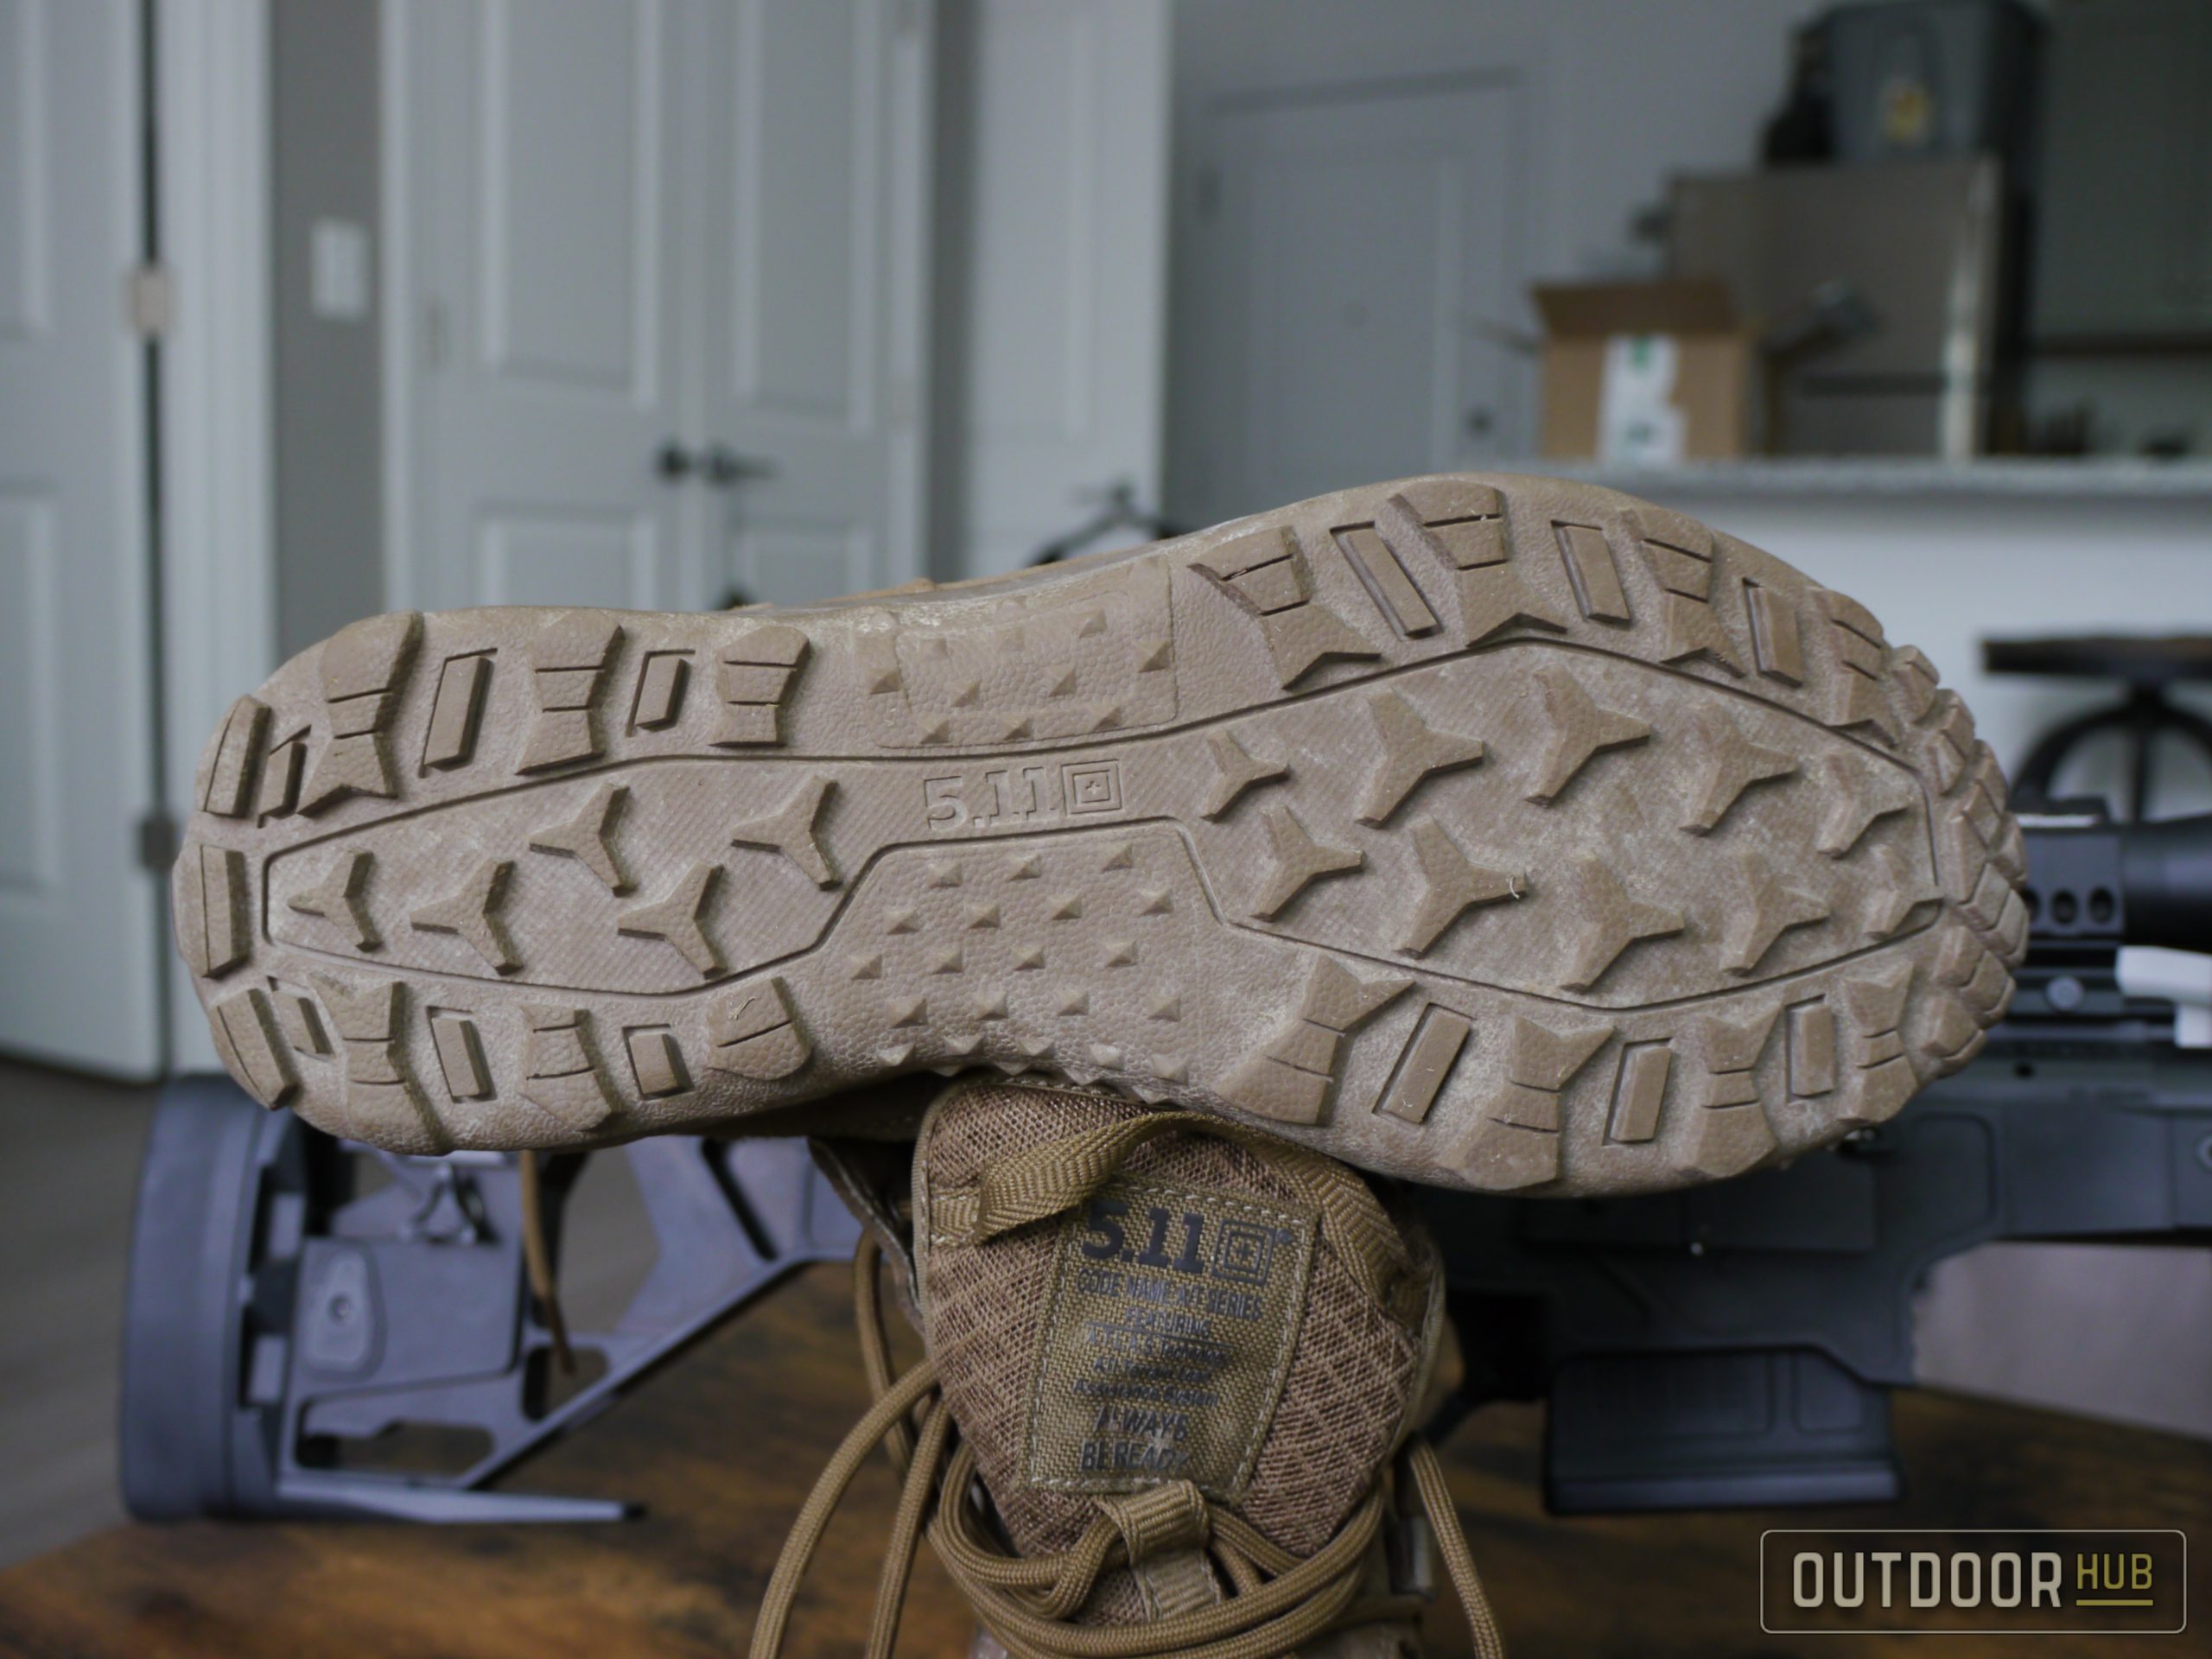 REVIEW: 5.11 A/T 6" Non-Zip Boots - Fire and Forget Boots?